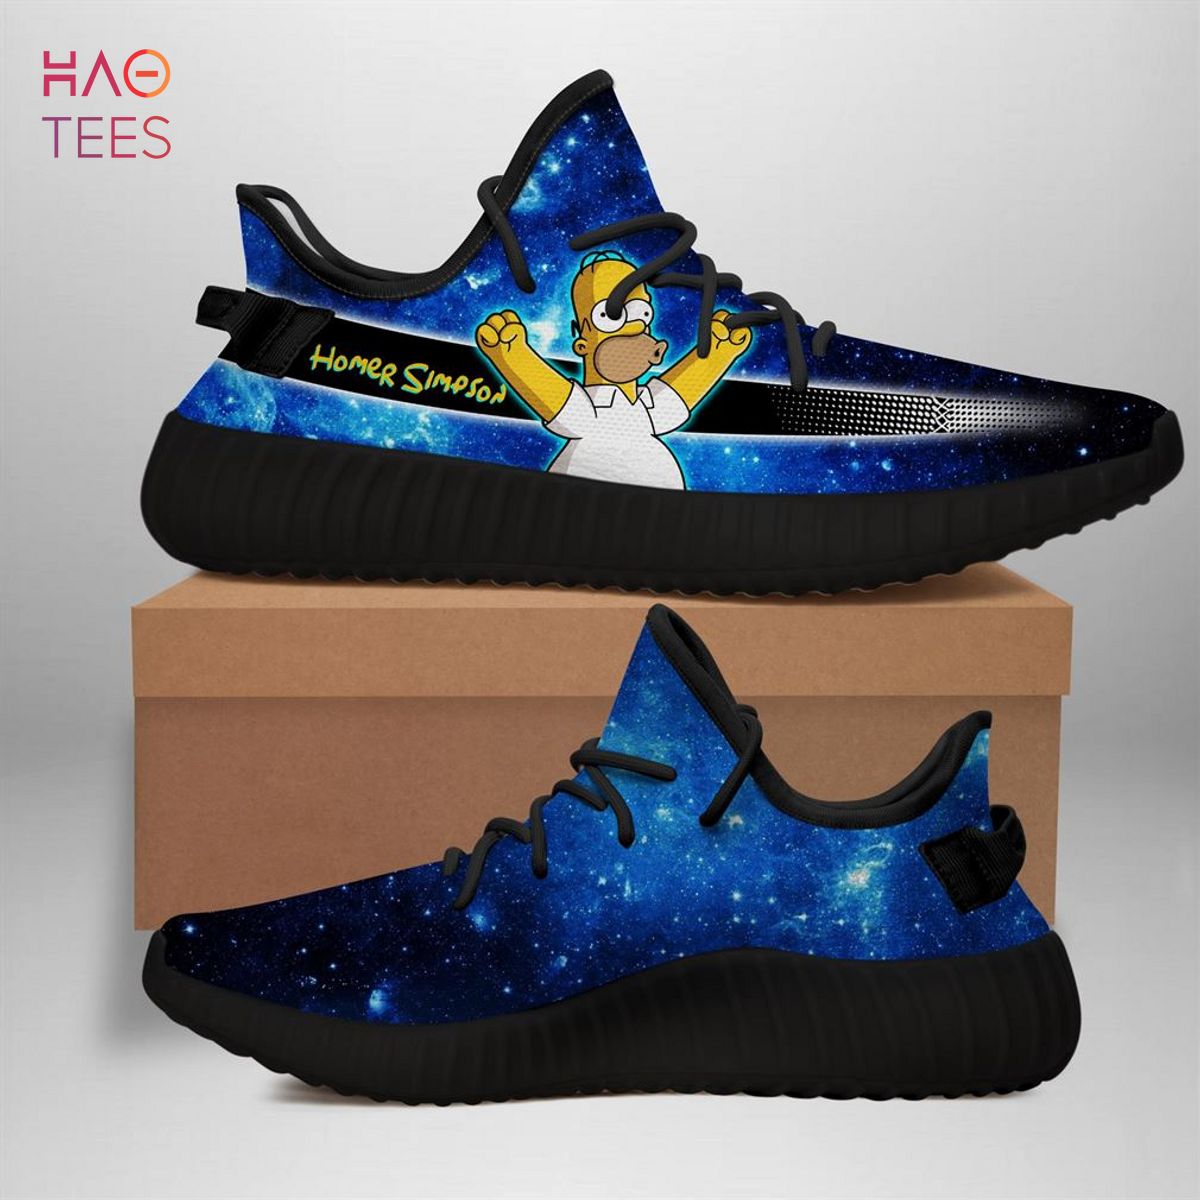 [TRENDDING] The Simpsons Homer Simpson Yeezy Sneakers Shoes